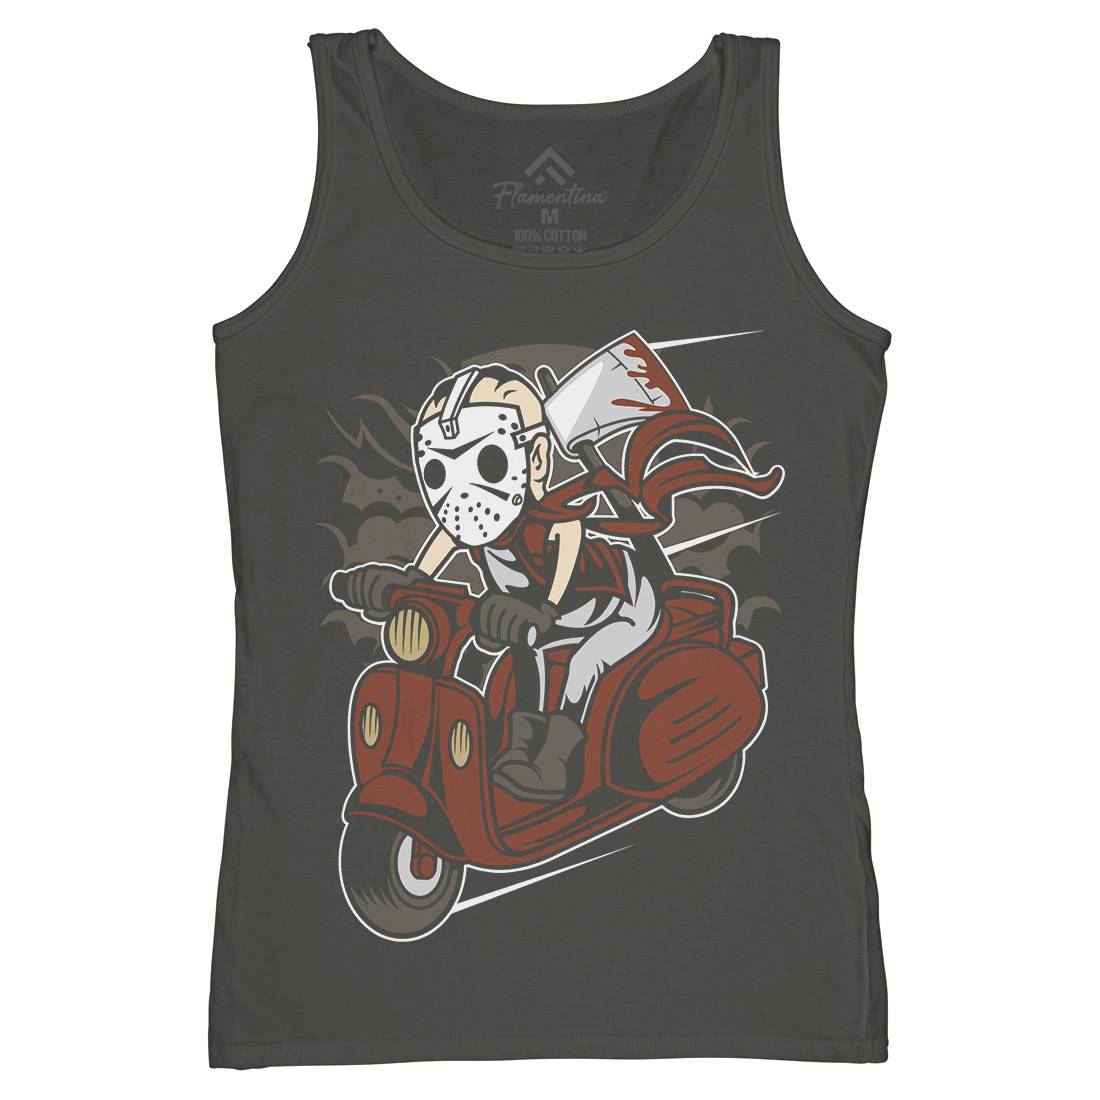 Slayer Scooter Womens Organic Tank Top Vest Motorcycles C447